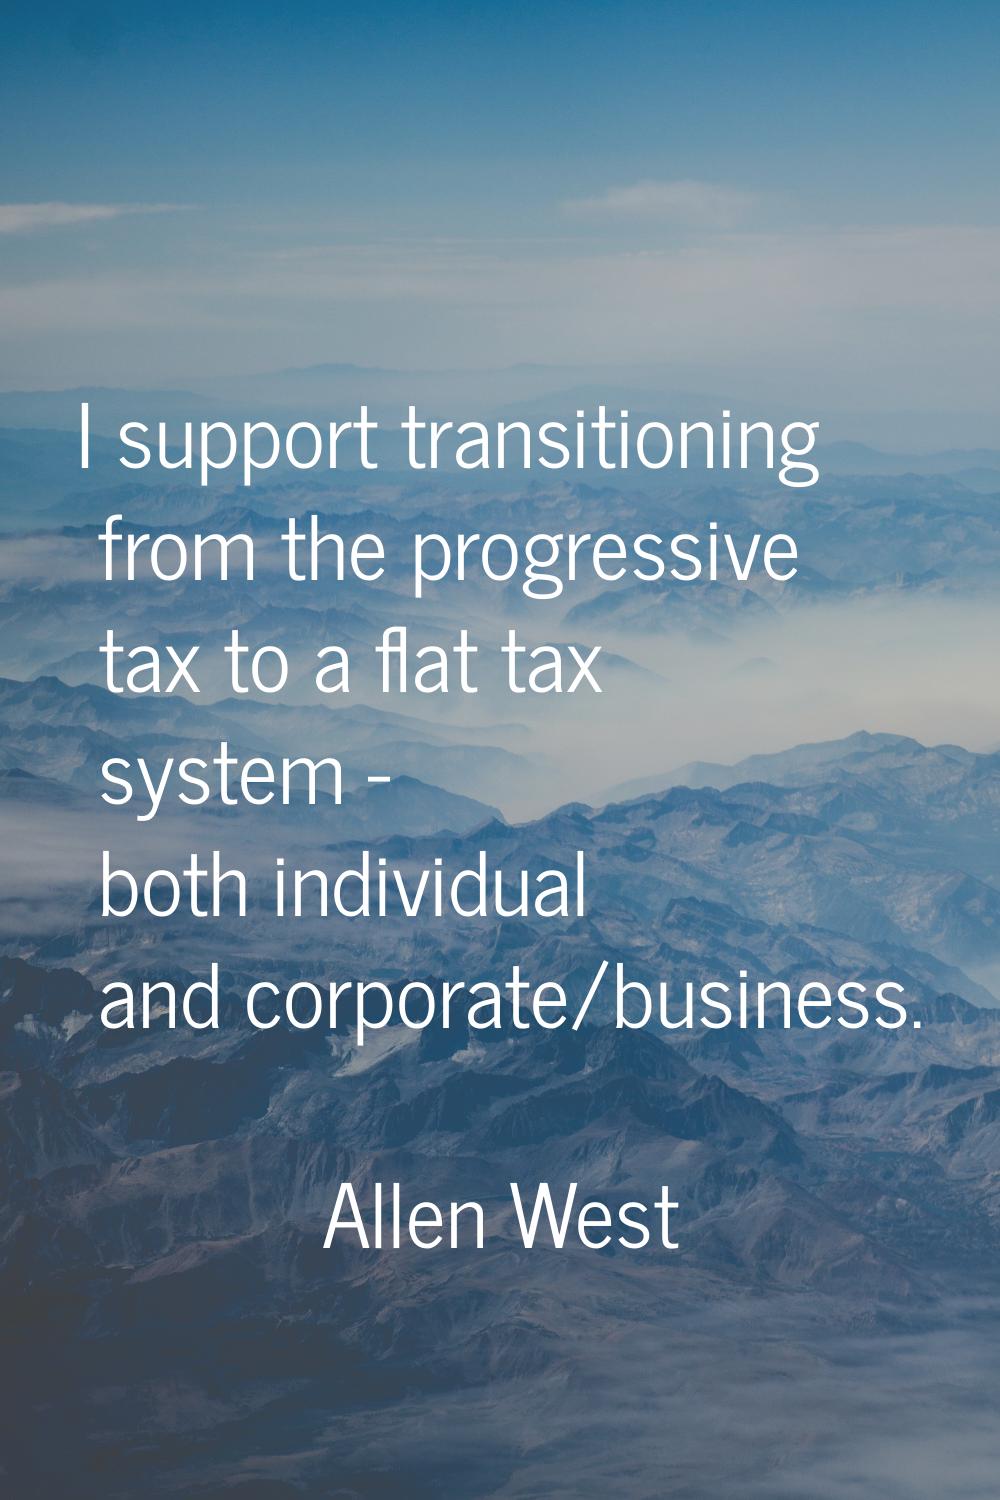 I support transitioning from the progressive tax to a flat tax system - both individual and corpora